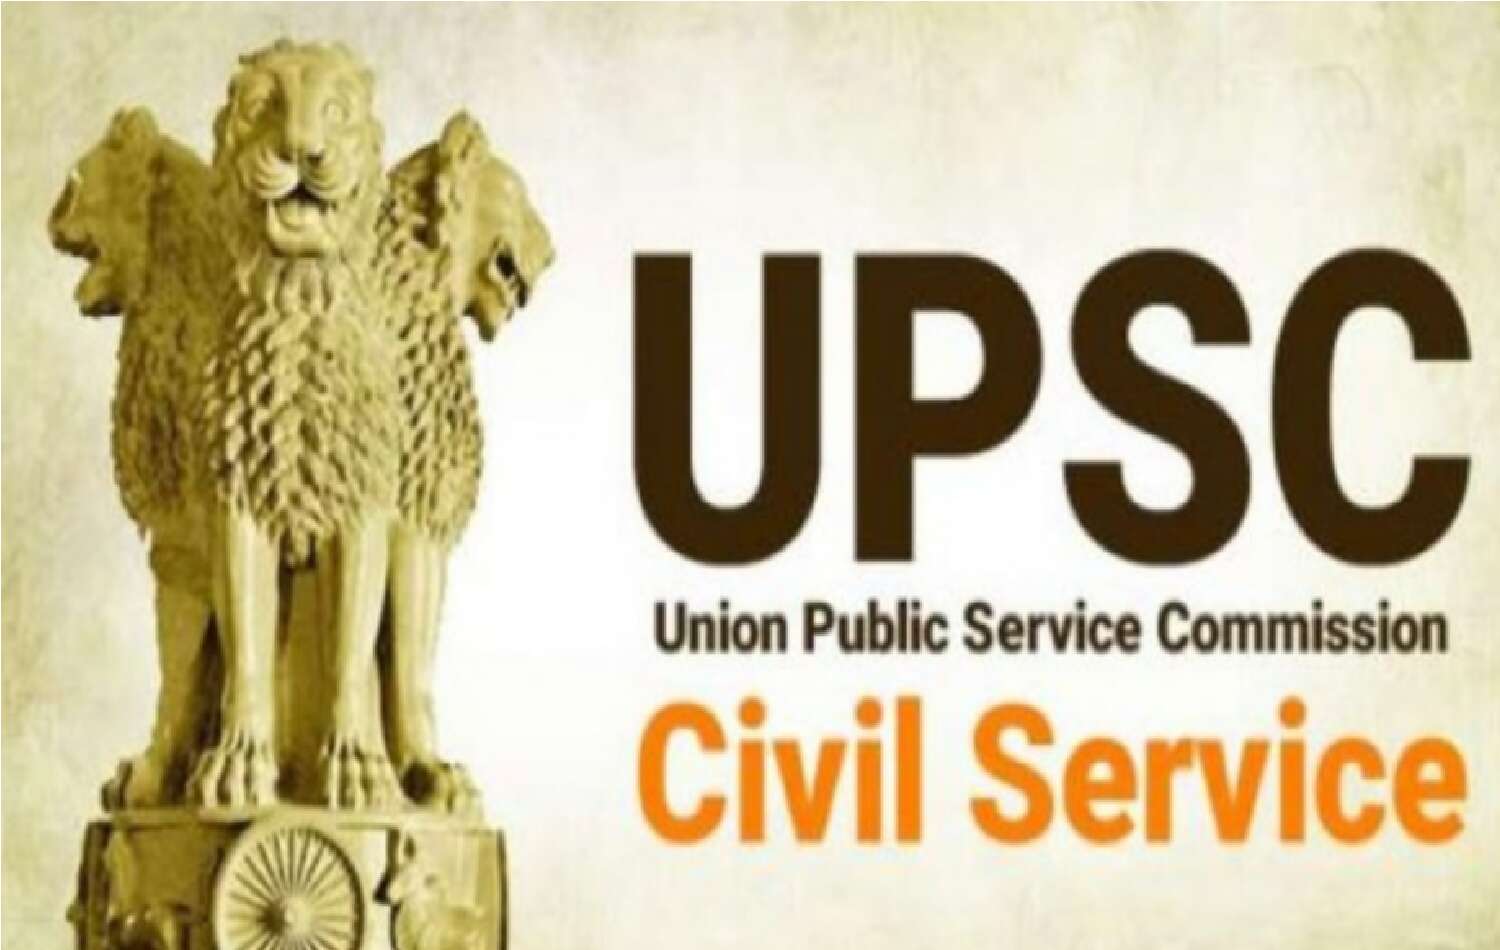 Sarkari Naukri: Recruitment out in UPSC, candidates up to 50 years can apply